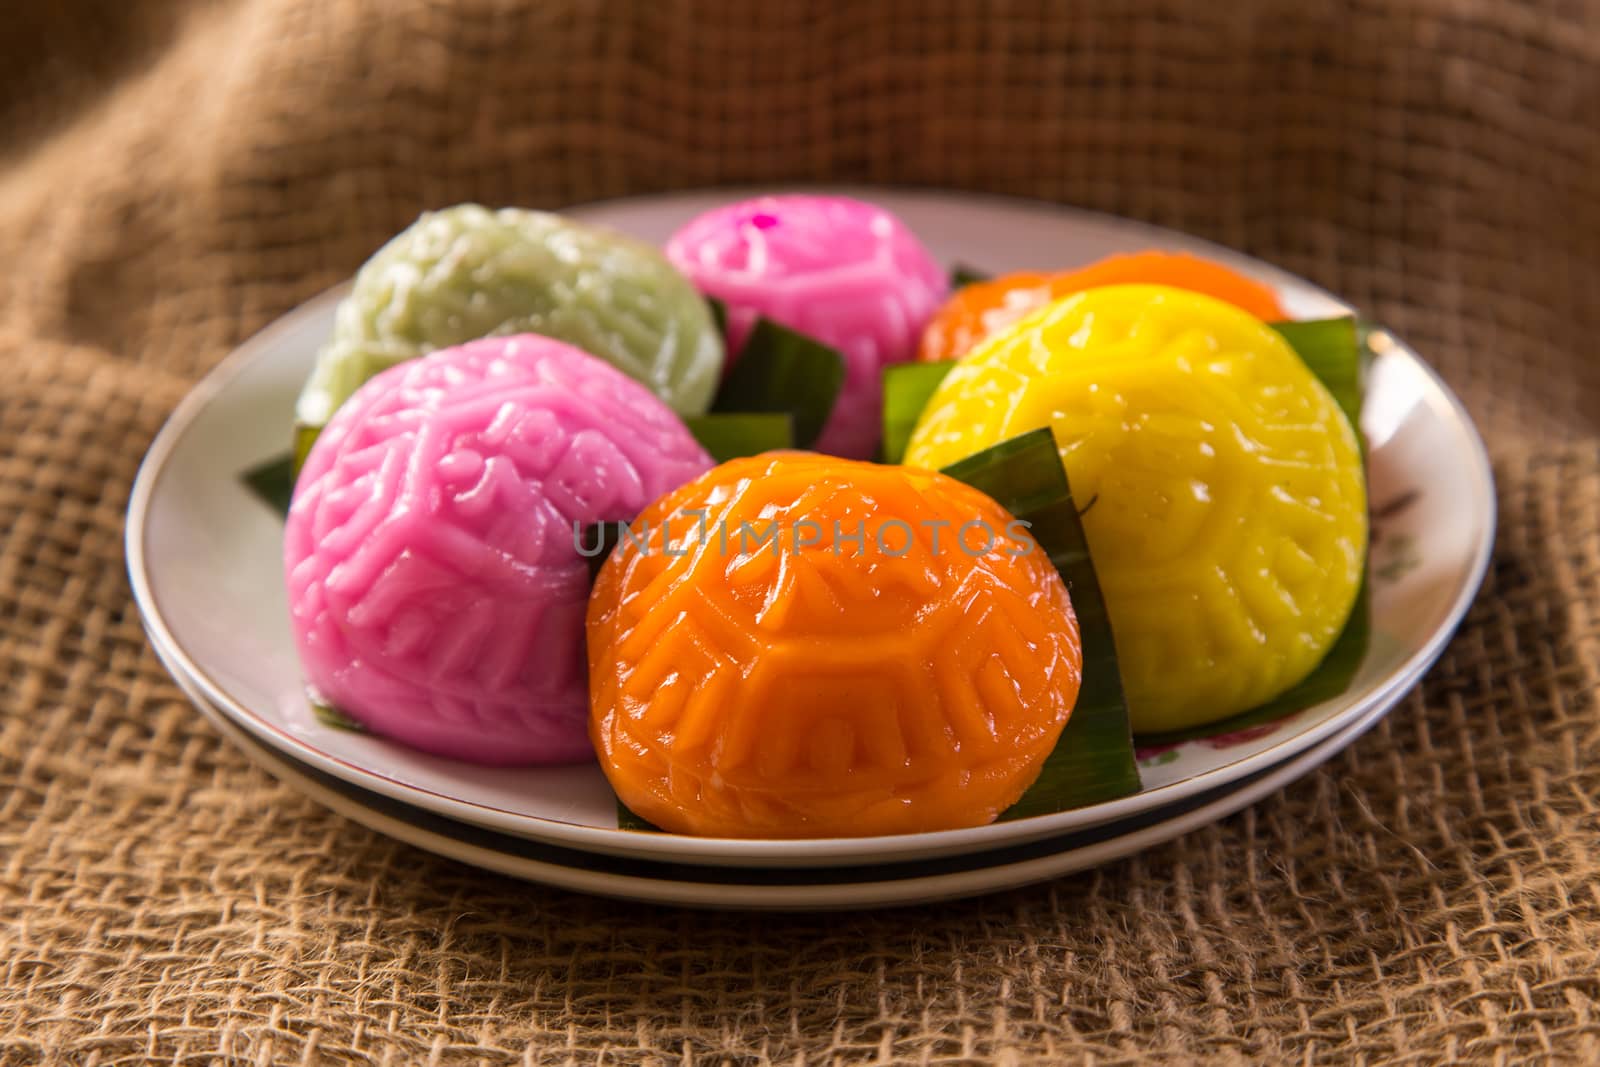 Ang ku kueh or chinese red tortoise cake is a traditional Asian dessert pudding made from glutinous rice flour with a salty or sweet filling